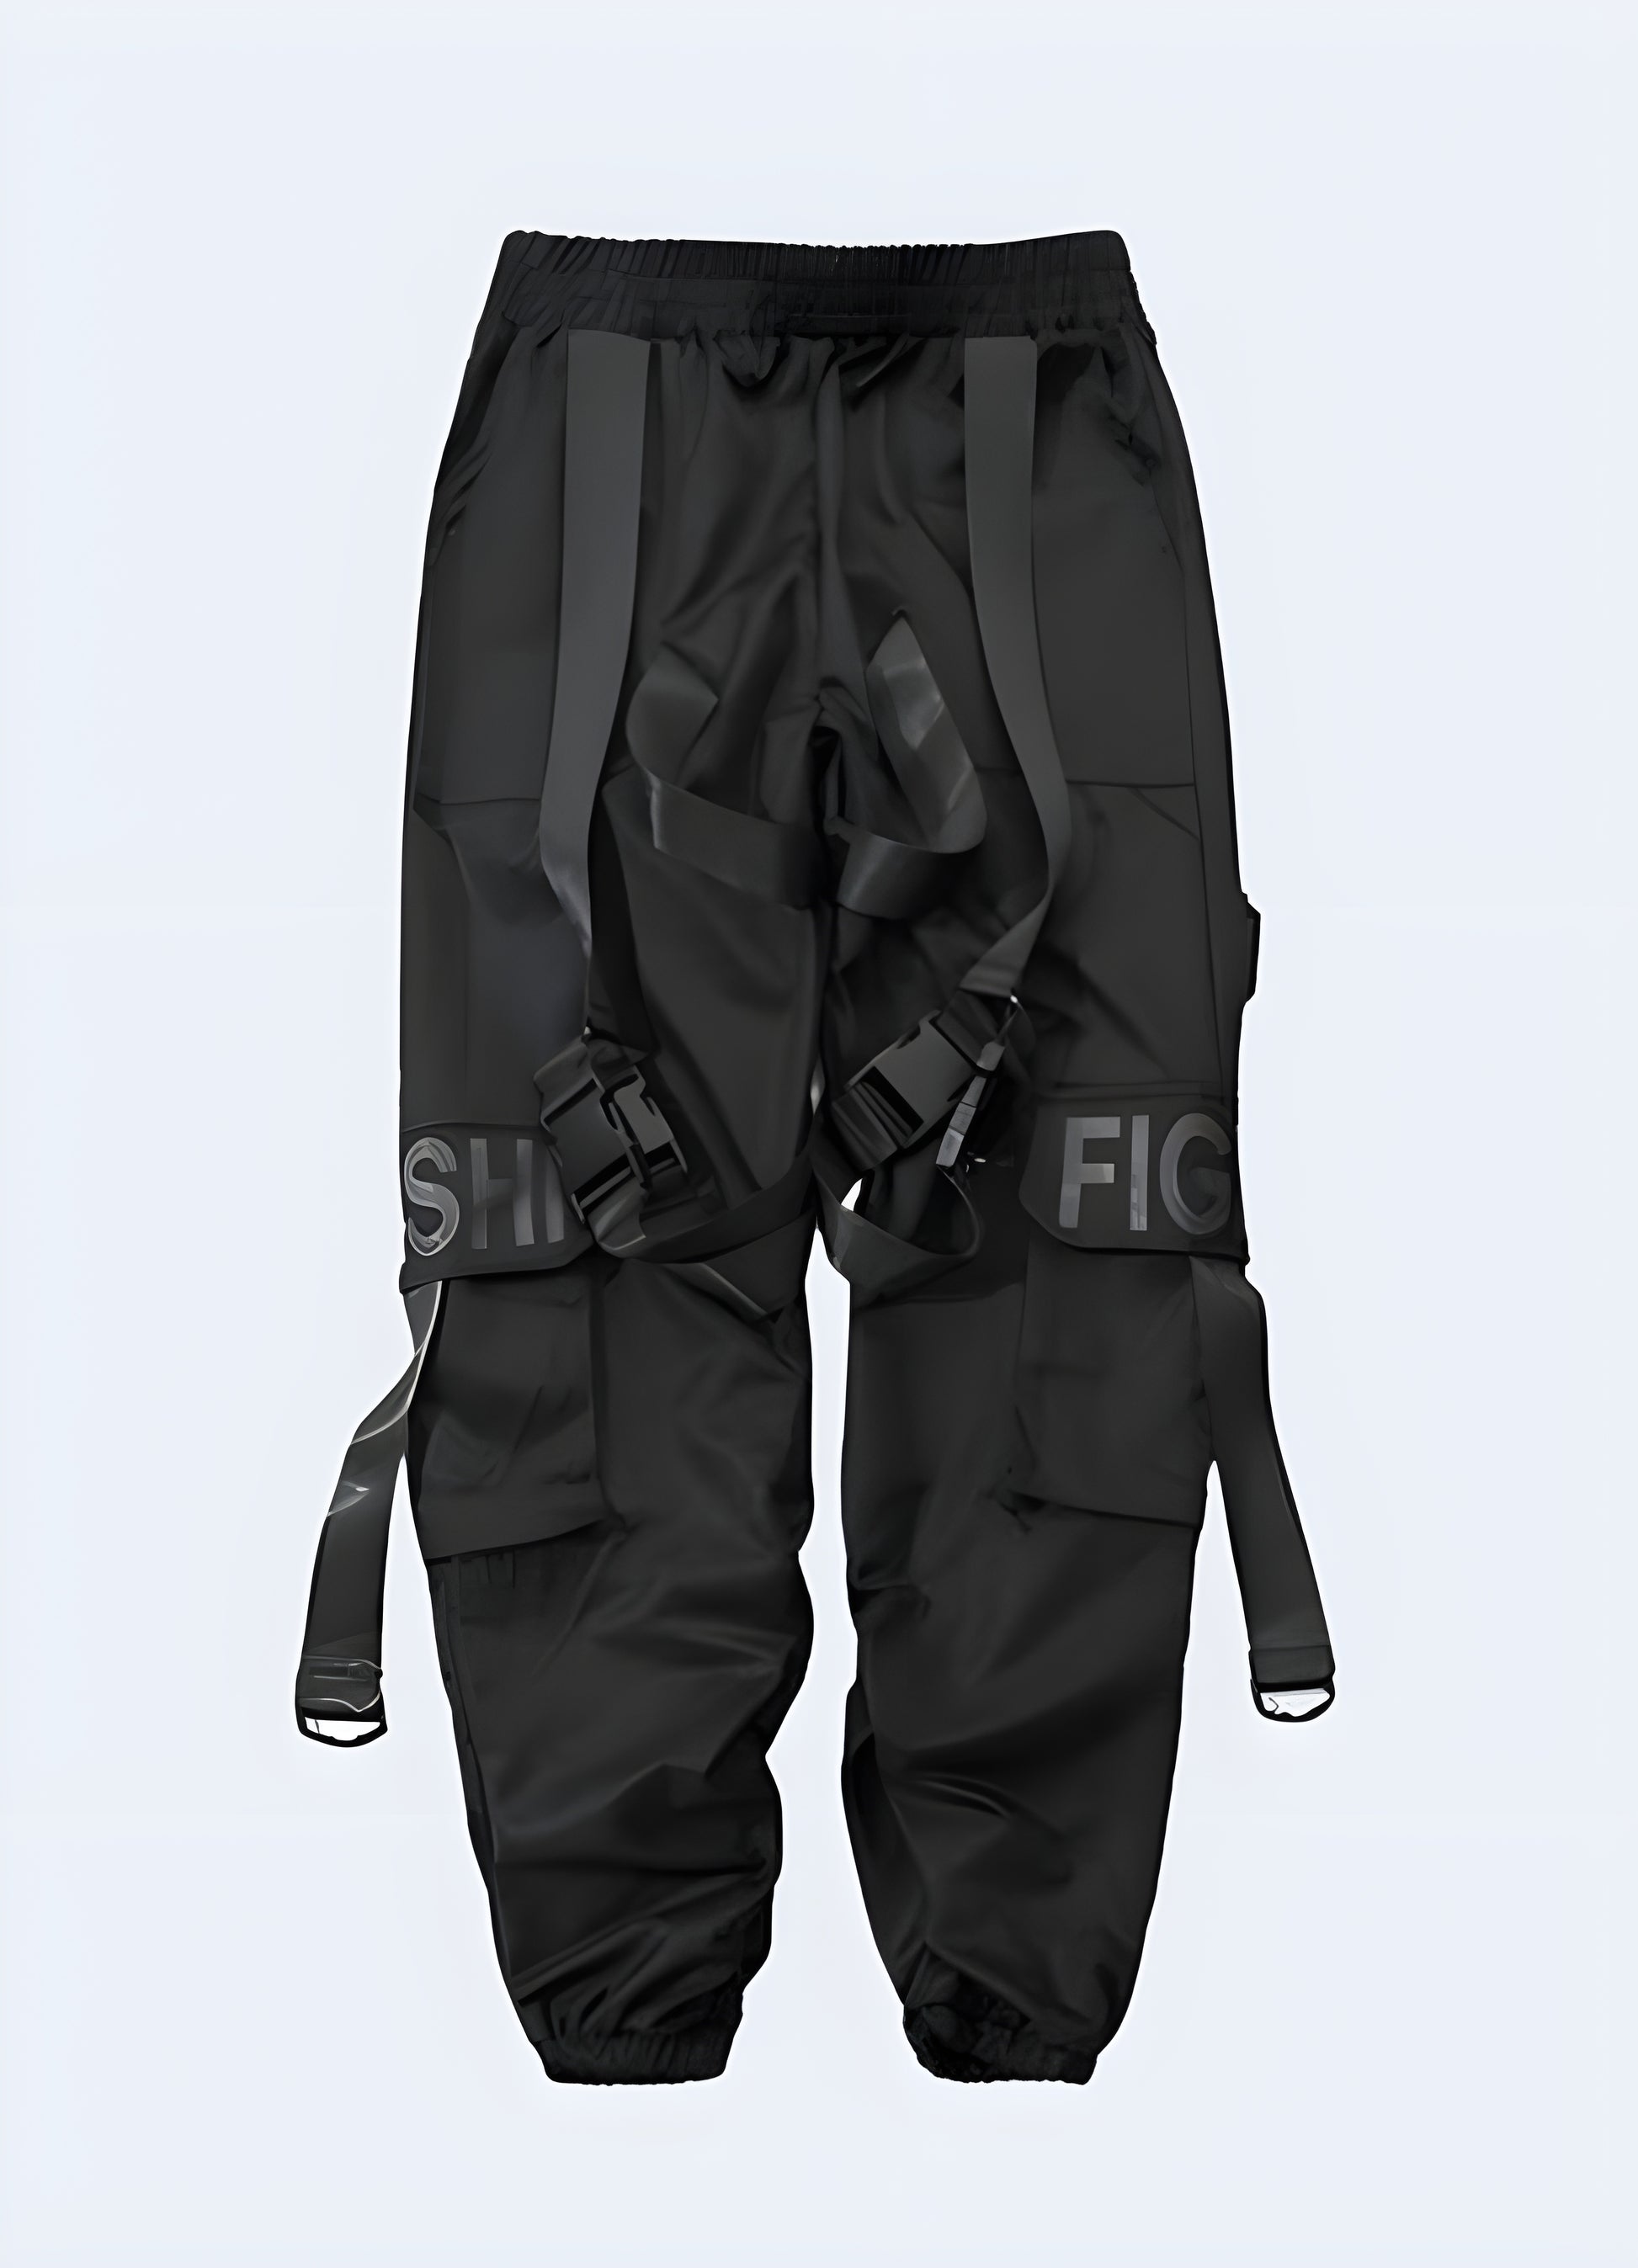 Multiple pockets and zippers on the side black jogger cargo pants front view.